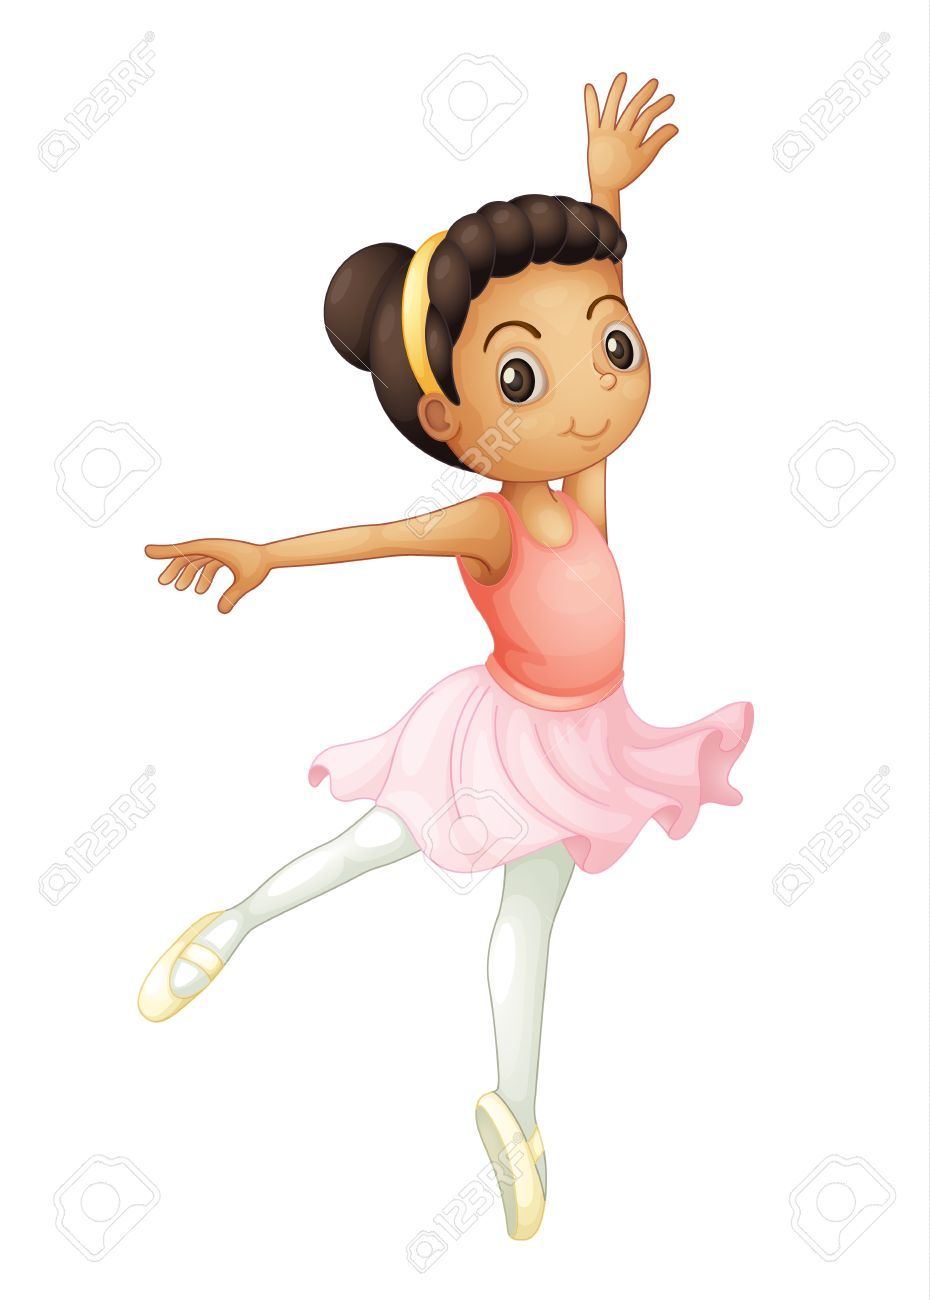 102941 Girl free clipart.